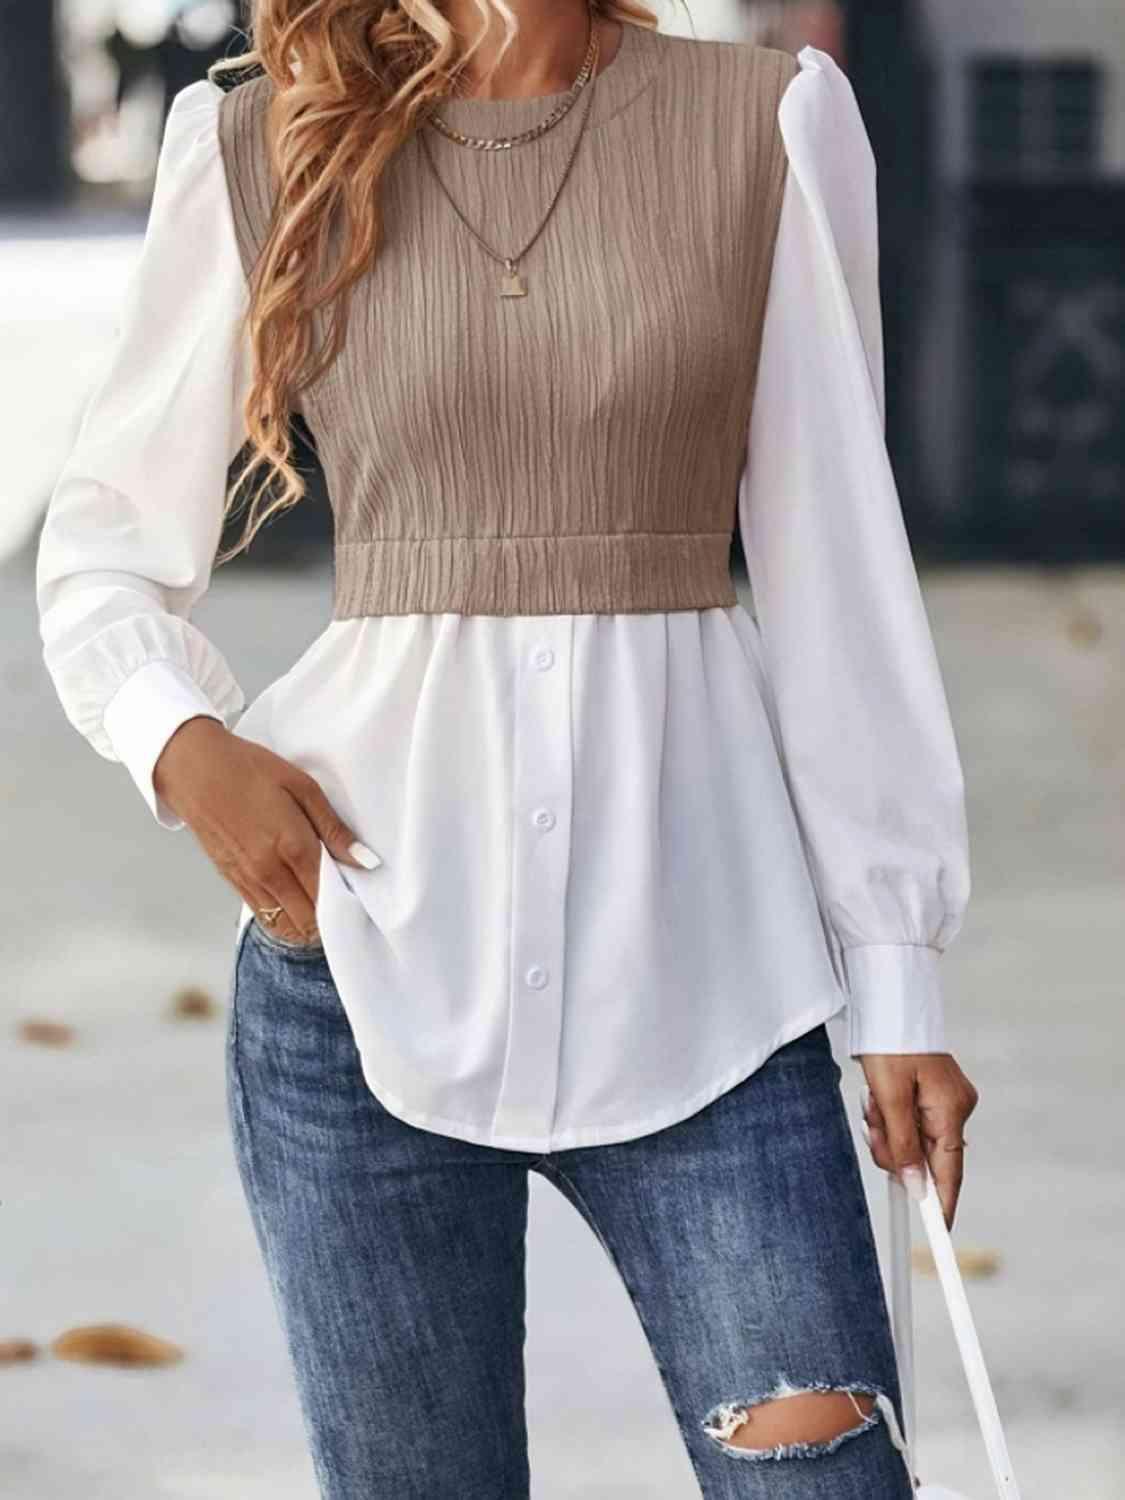 a woman wearing a white blouse and ripped jeans